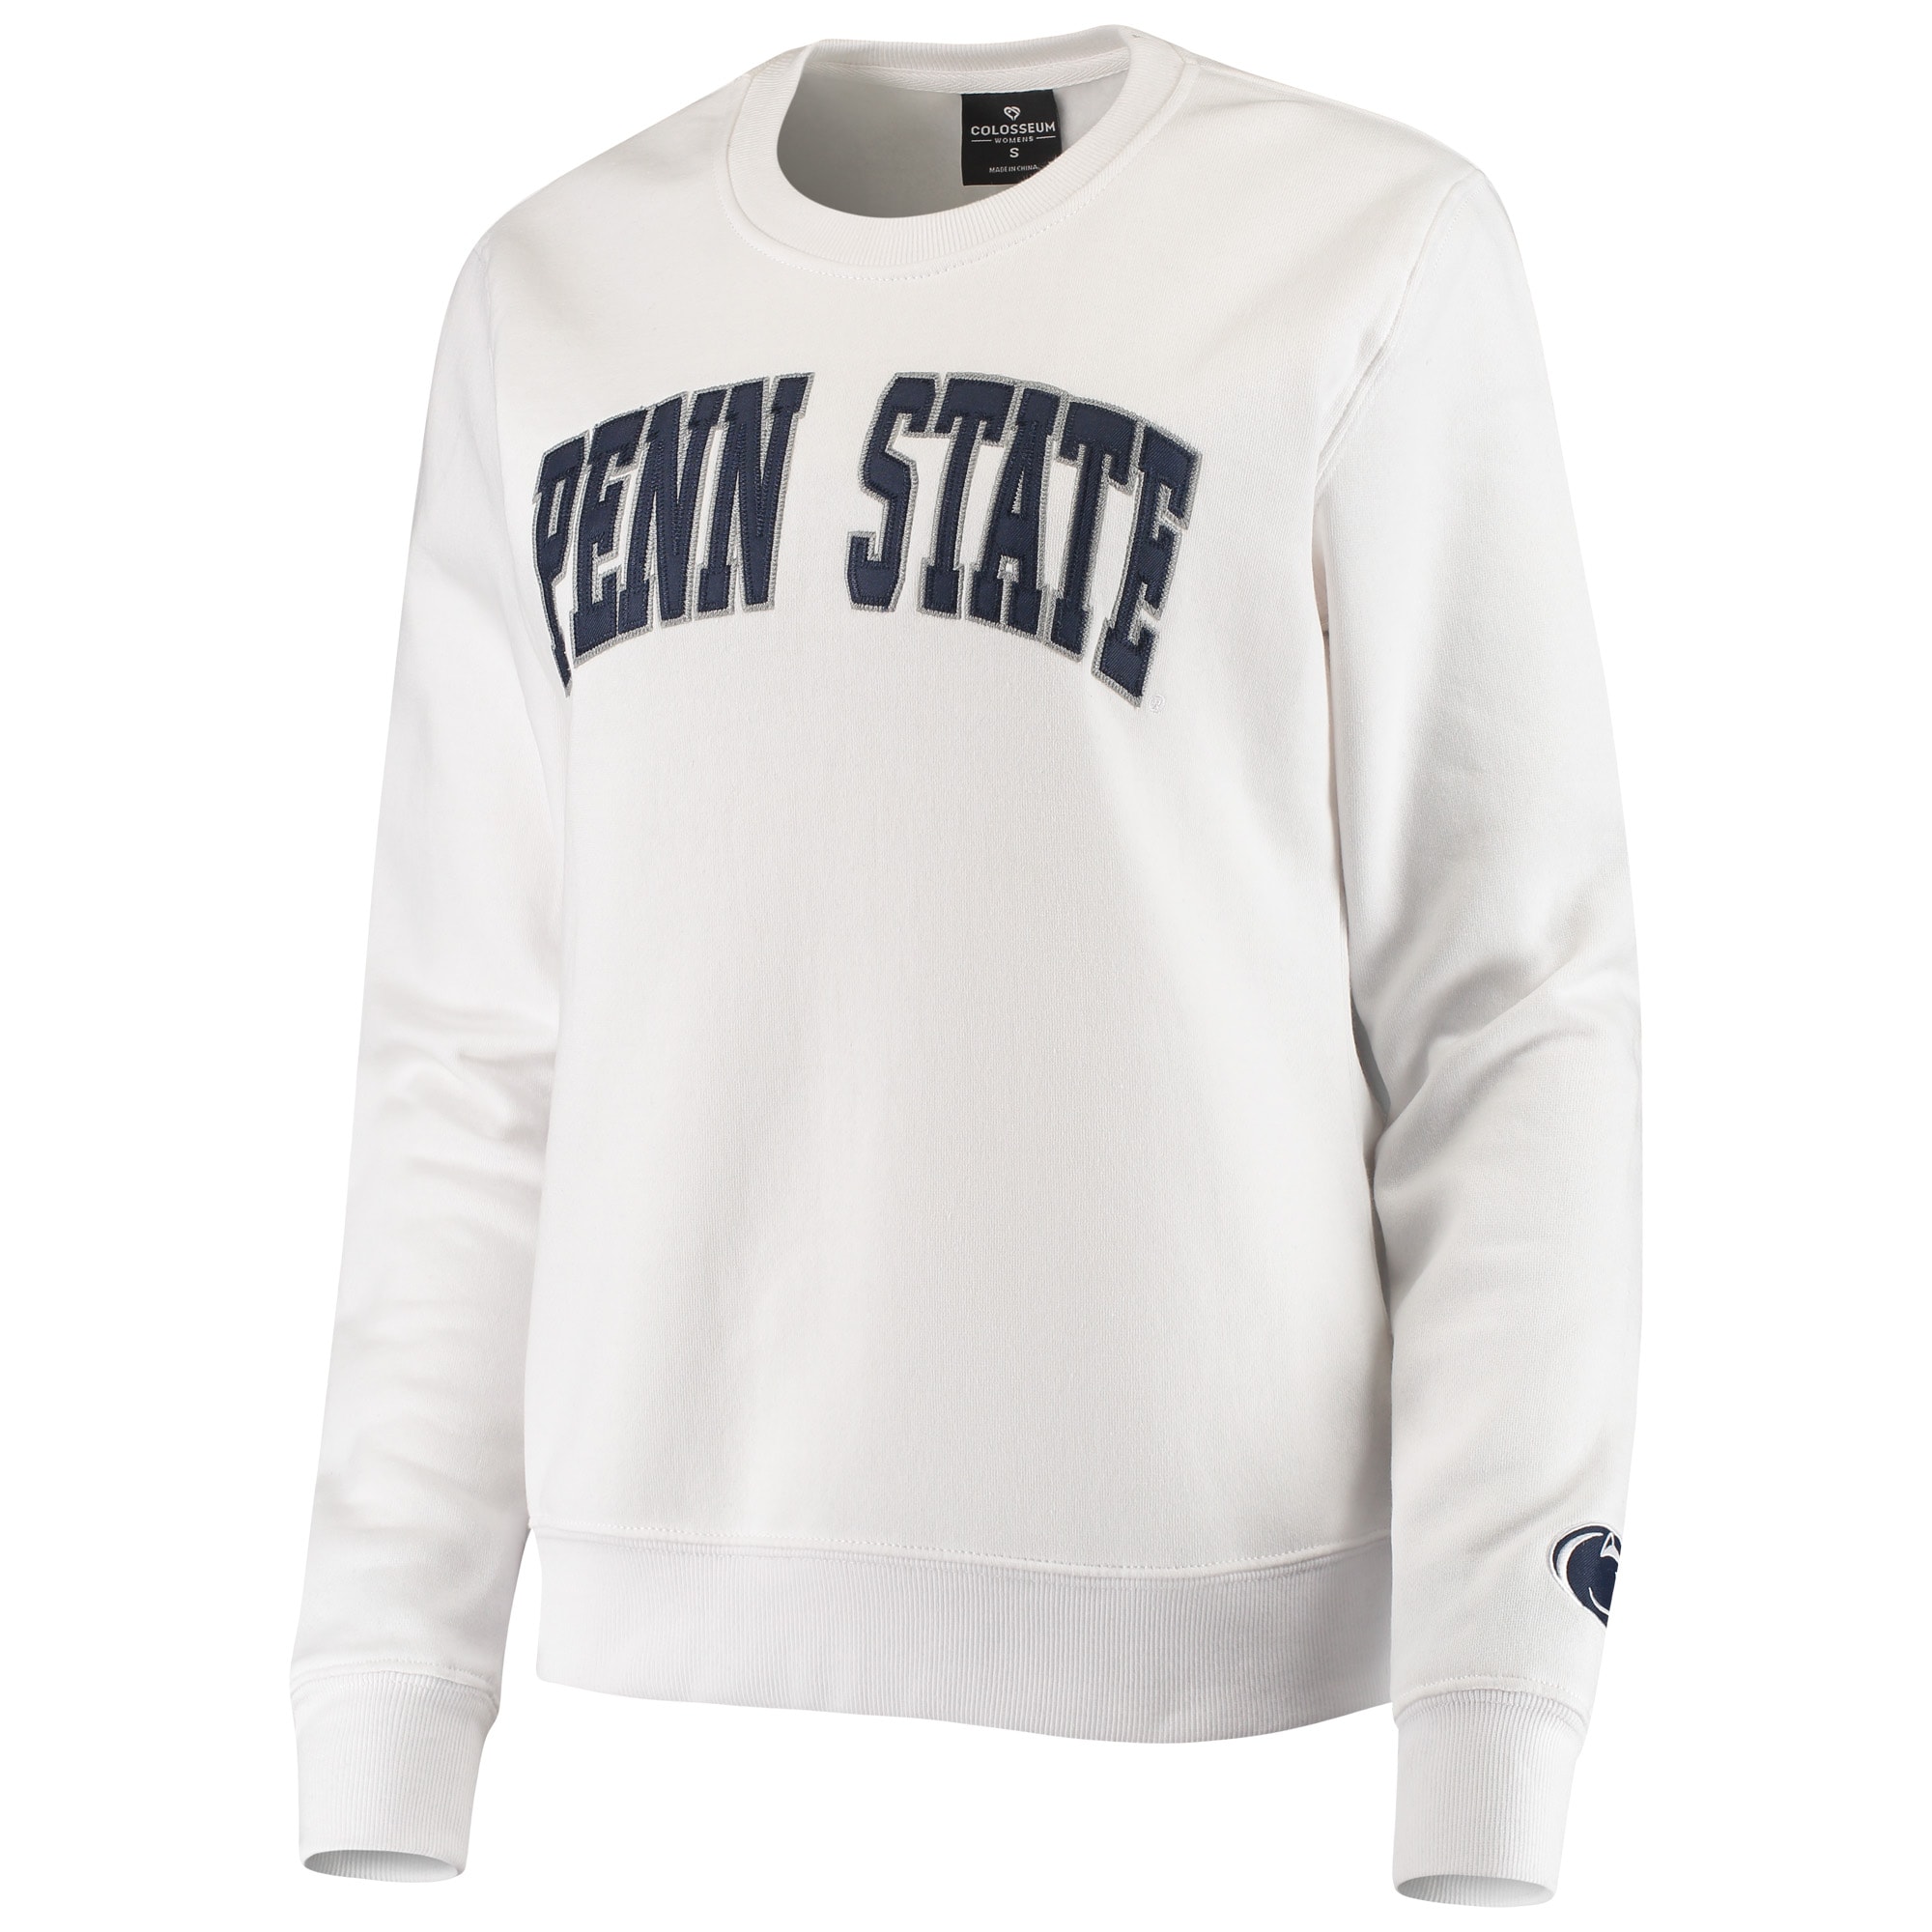 Women's Colosseum White Penn State Nittany Lions Campanile Pullover Sweatshirt - image 2 of 3